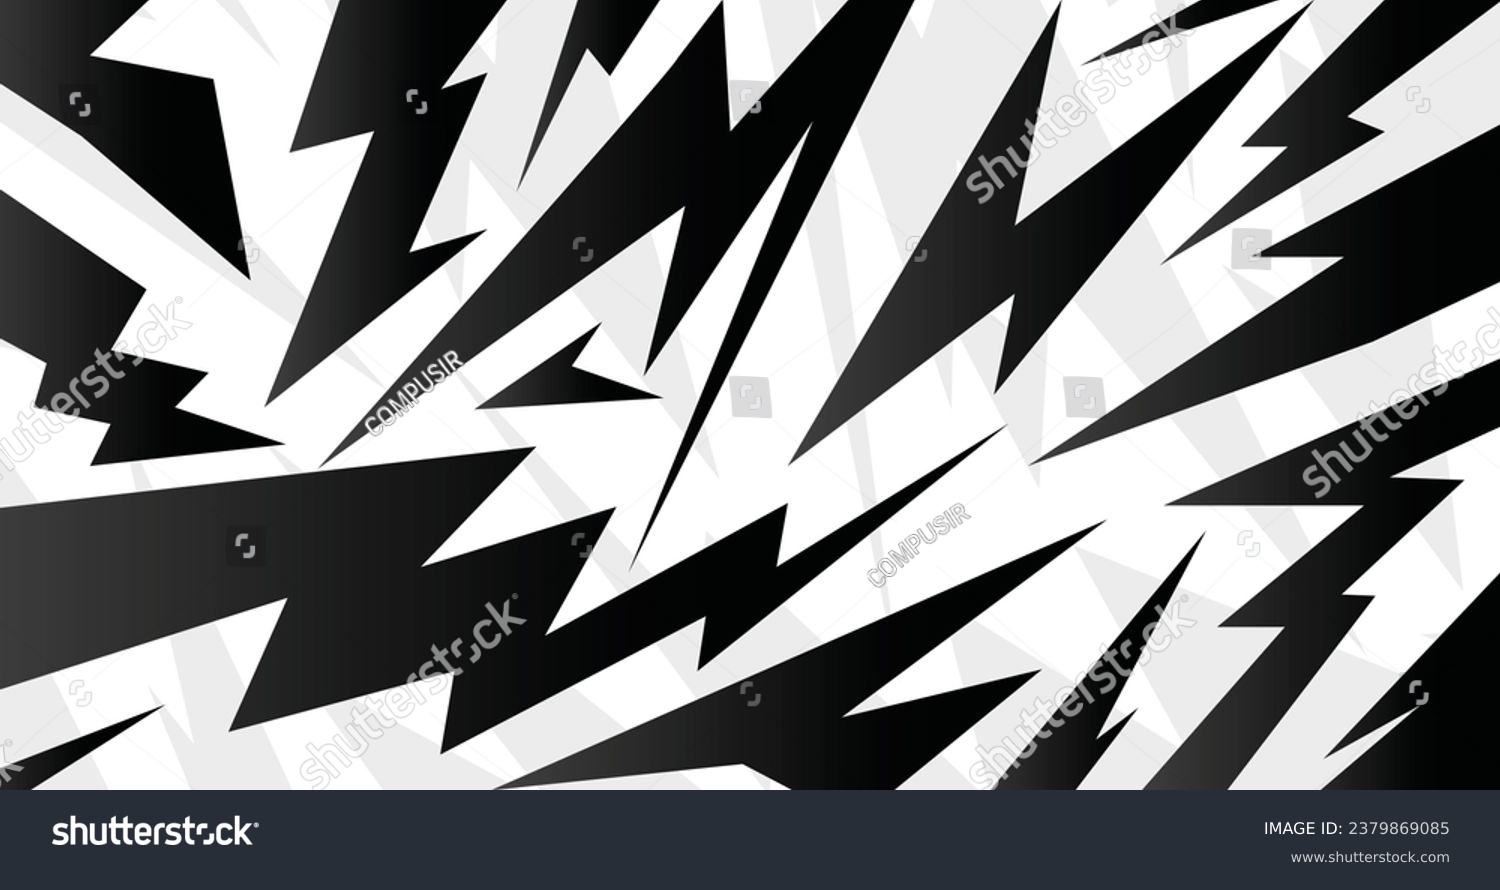 SVG of Monochromatic Abstract Spiked and various sharp Zigzag Lines arrow pattern on Black and White Background svg